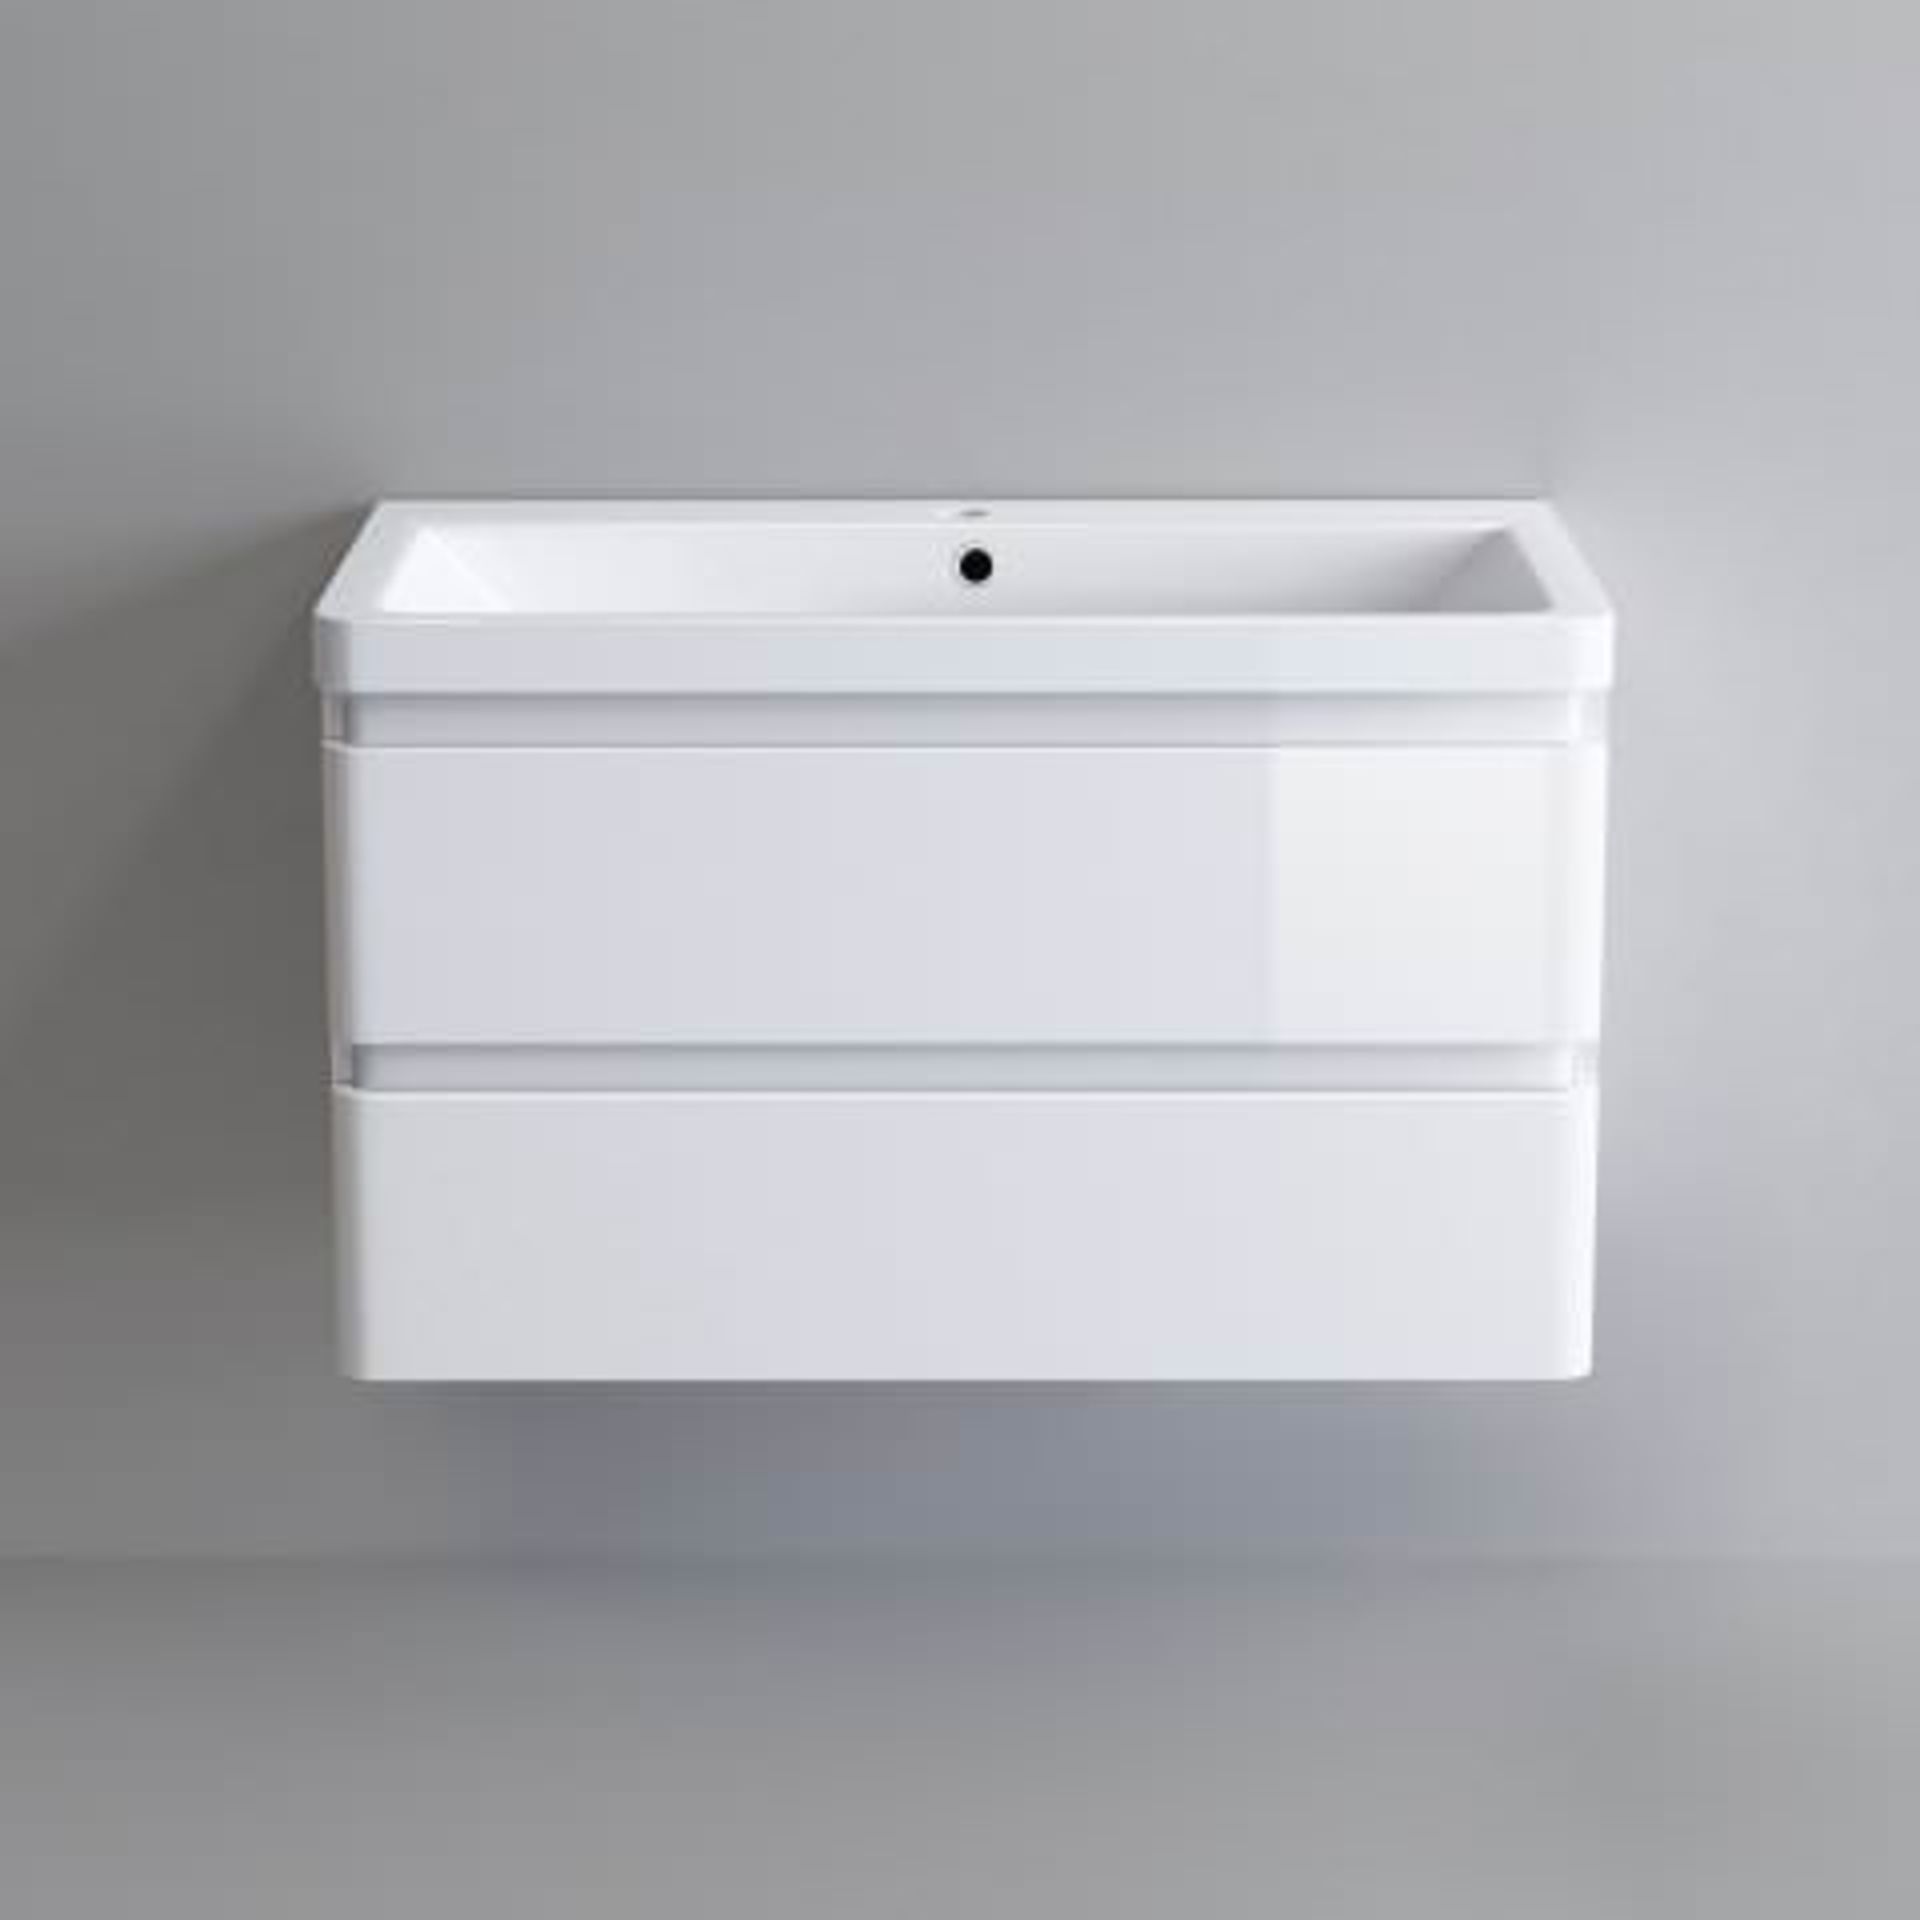 (A23) 800mm Denver II Gloss White Built In Basin Drawer Unit - Wall Hung. RRP £649.99. COMES - Image 5 of 5